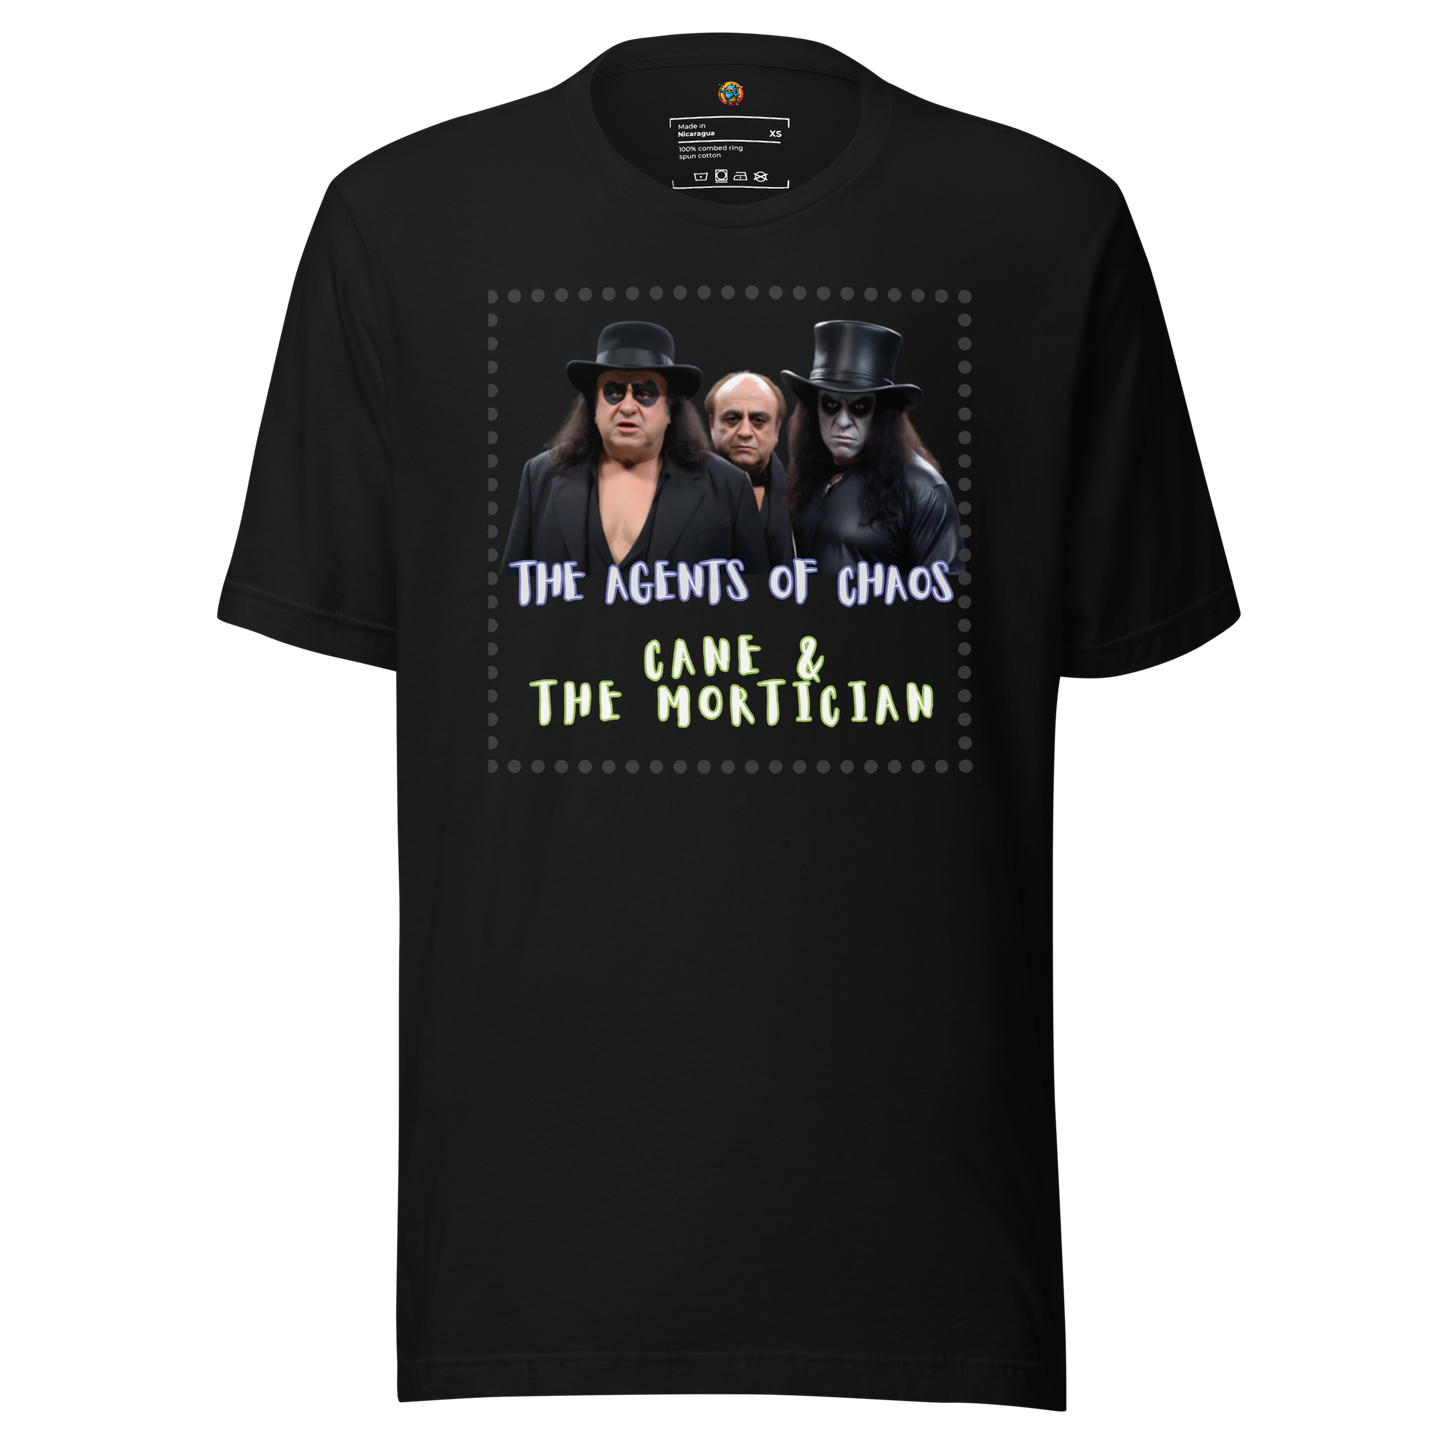 The Agents of Chaos, Cane & The Mortician - Unisex t-shirt